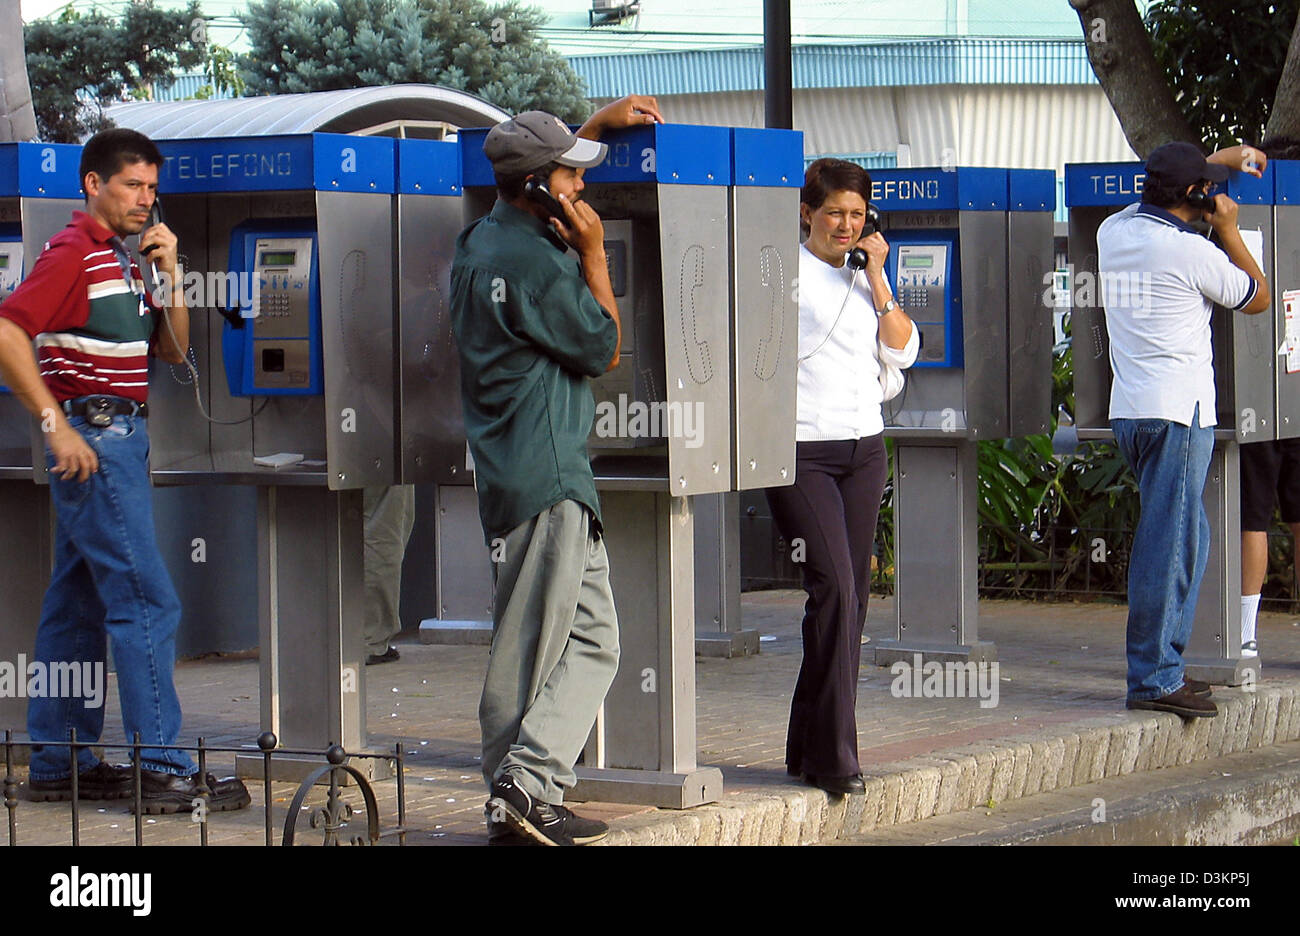 (dpa) - The picture shows Costa Ricans speaking using public telephones at Plaza Central in Alajuela, Costa Rica, 4 March 2005. Photo: Rolf Haid Stock Photo